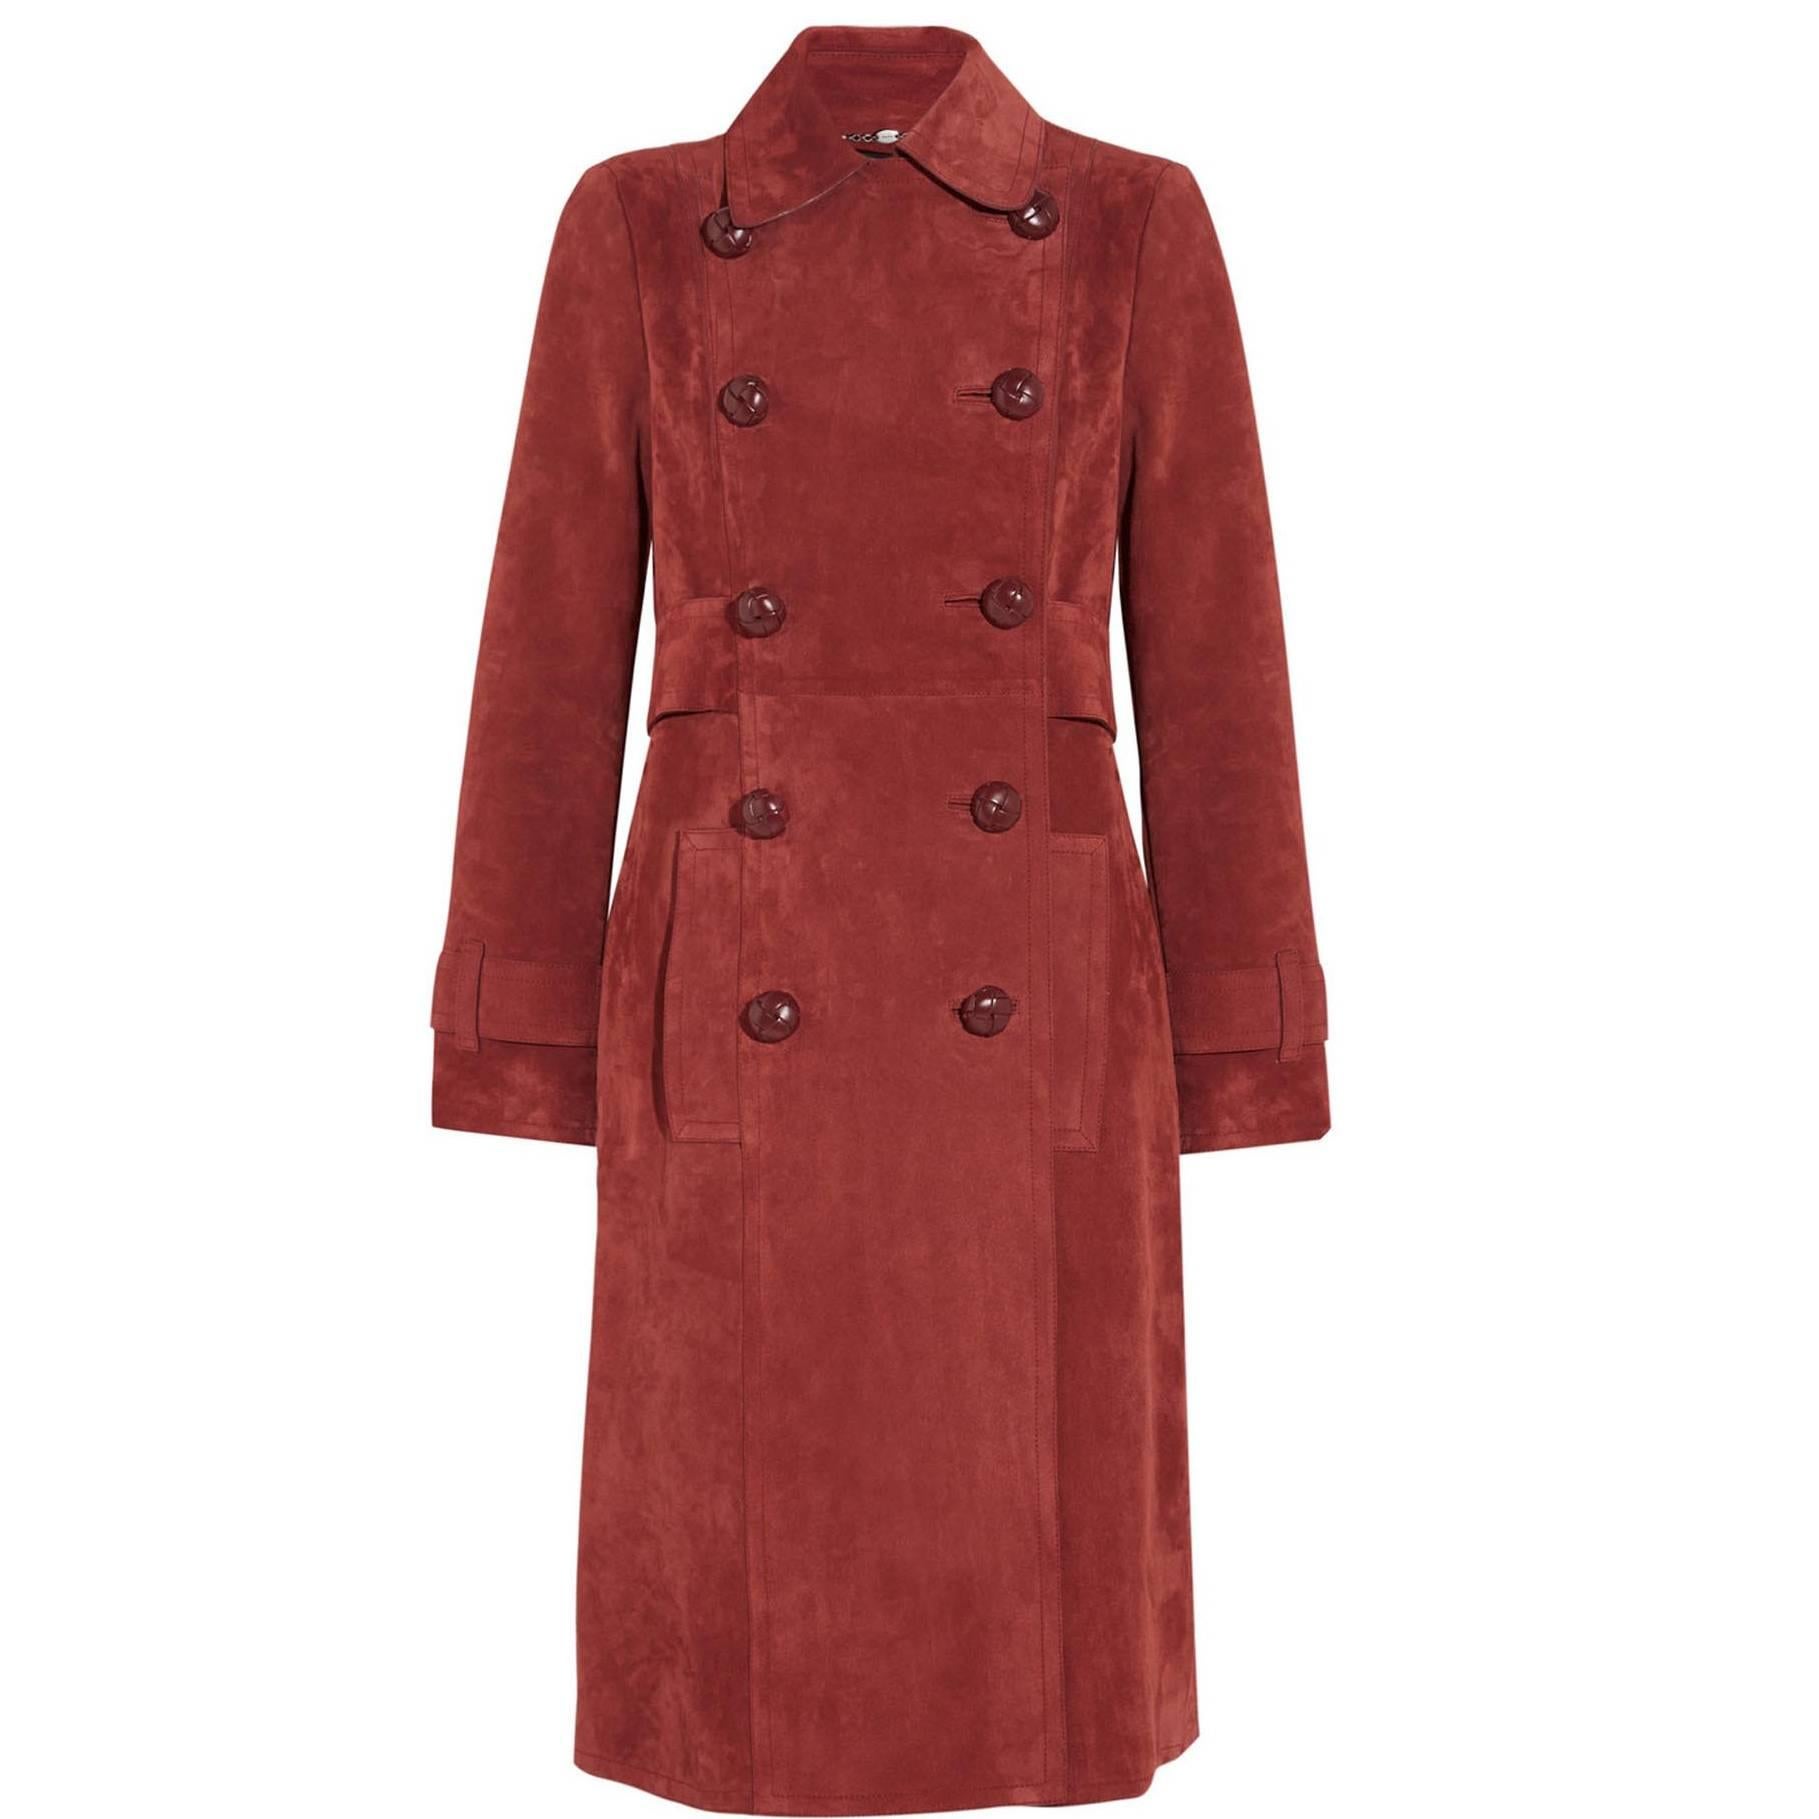 New Gucci Brick Red Suede Belted Leather Buttons Women's Trench Coat It. 40